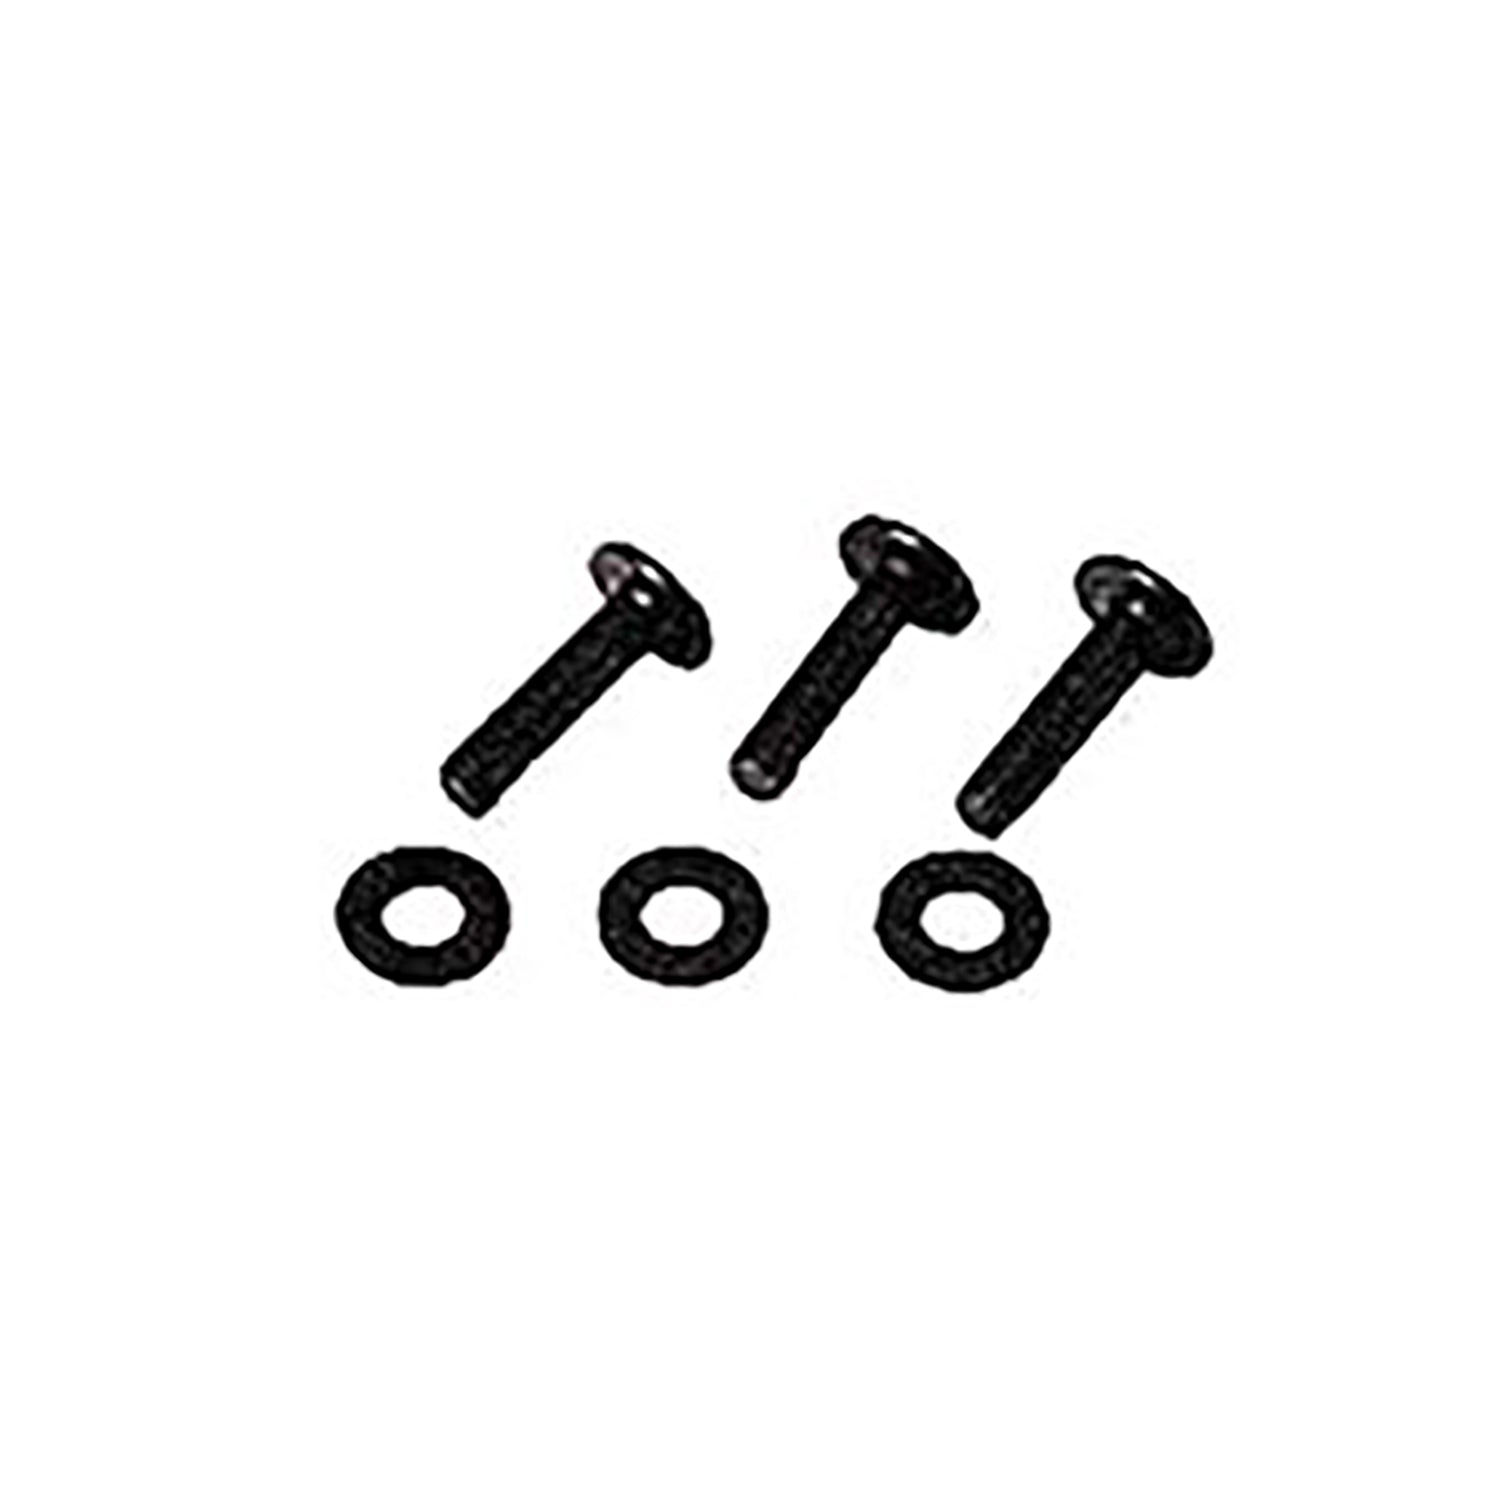 Odyssey ASW025 Rack Screws and Washers - 25 Pack - Hollywood DJ